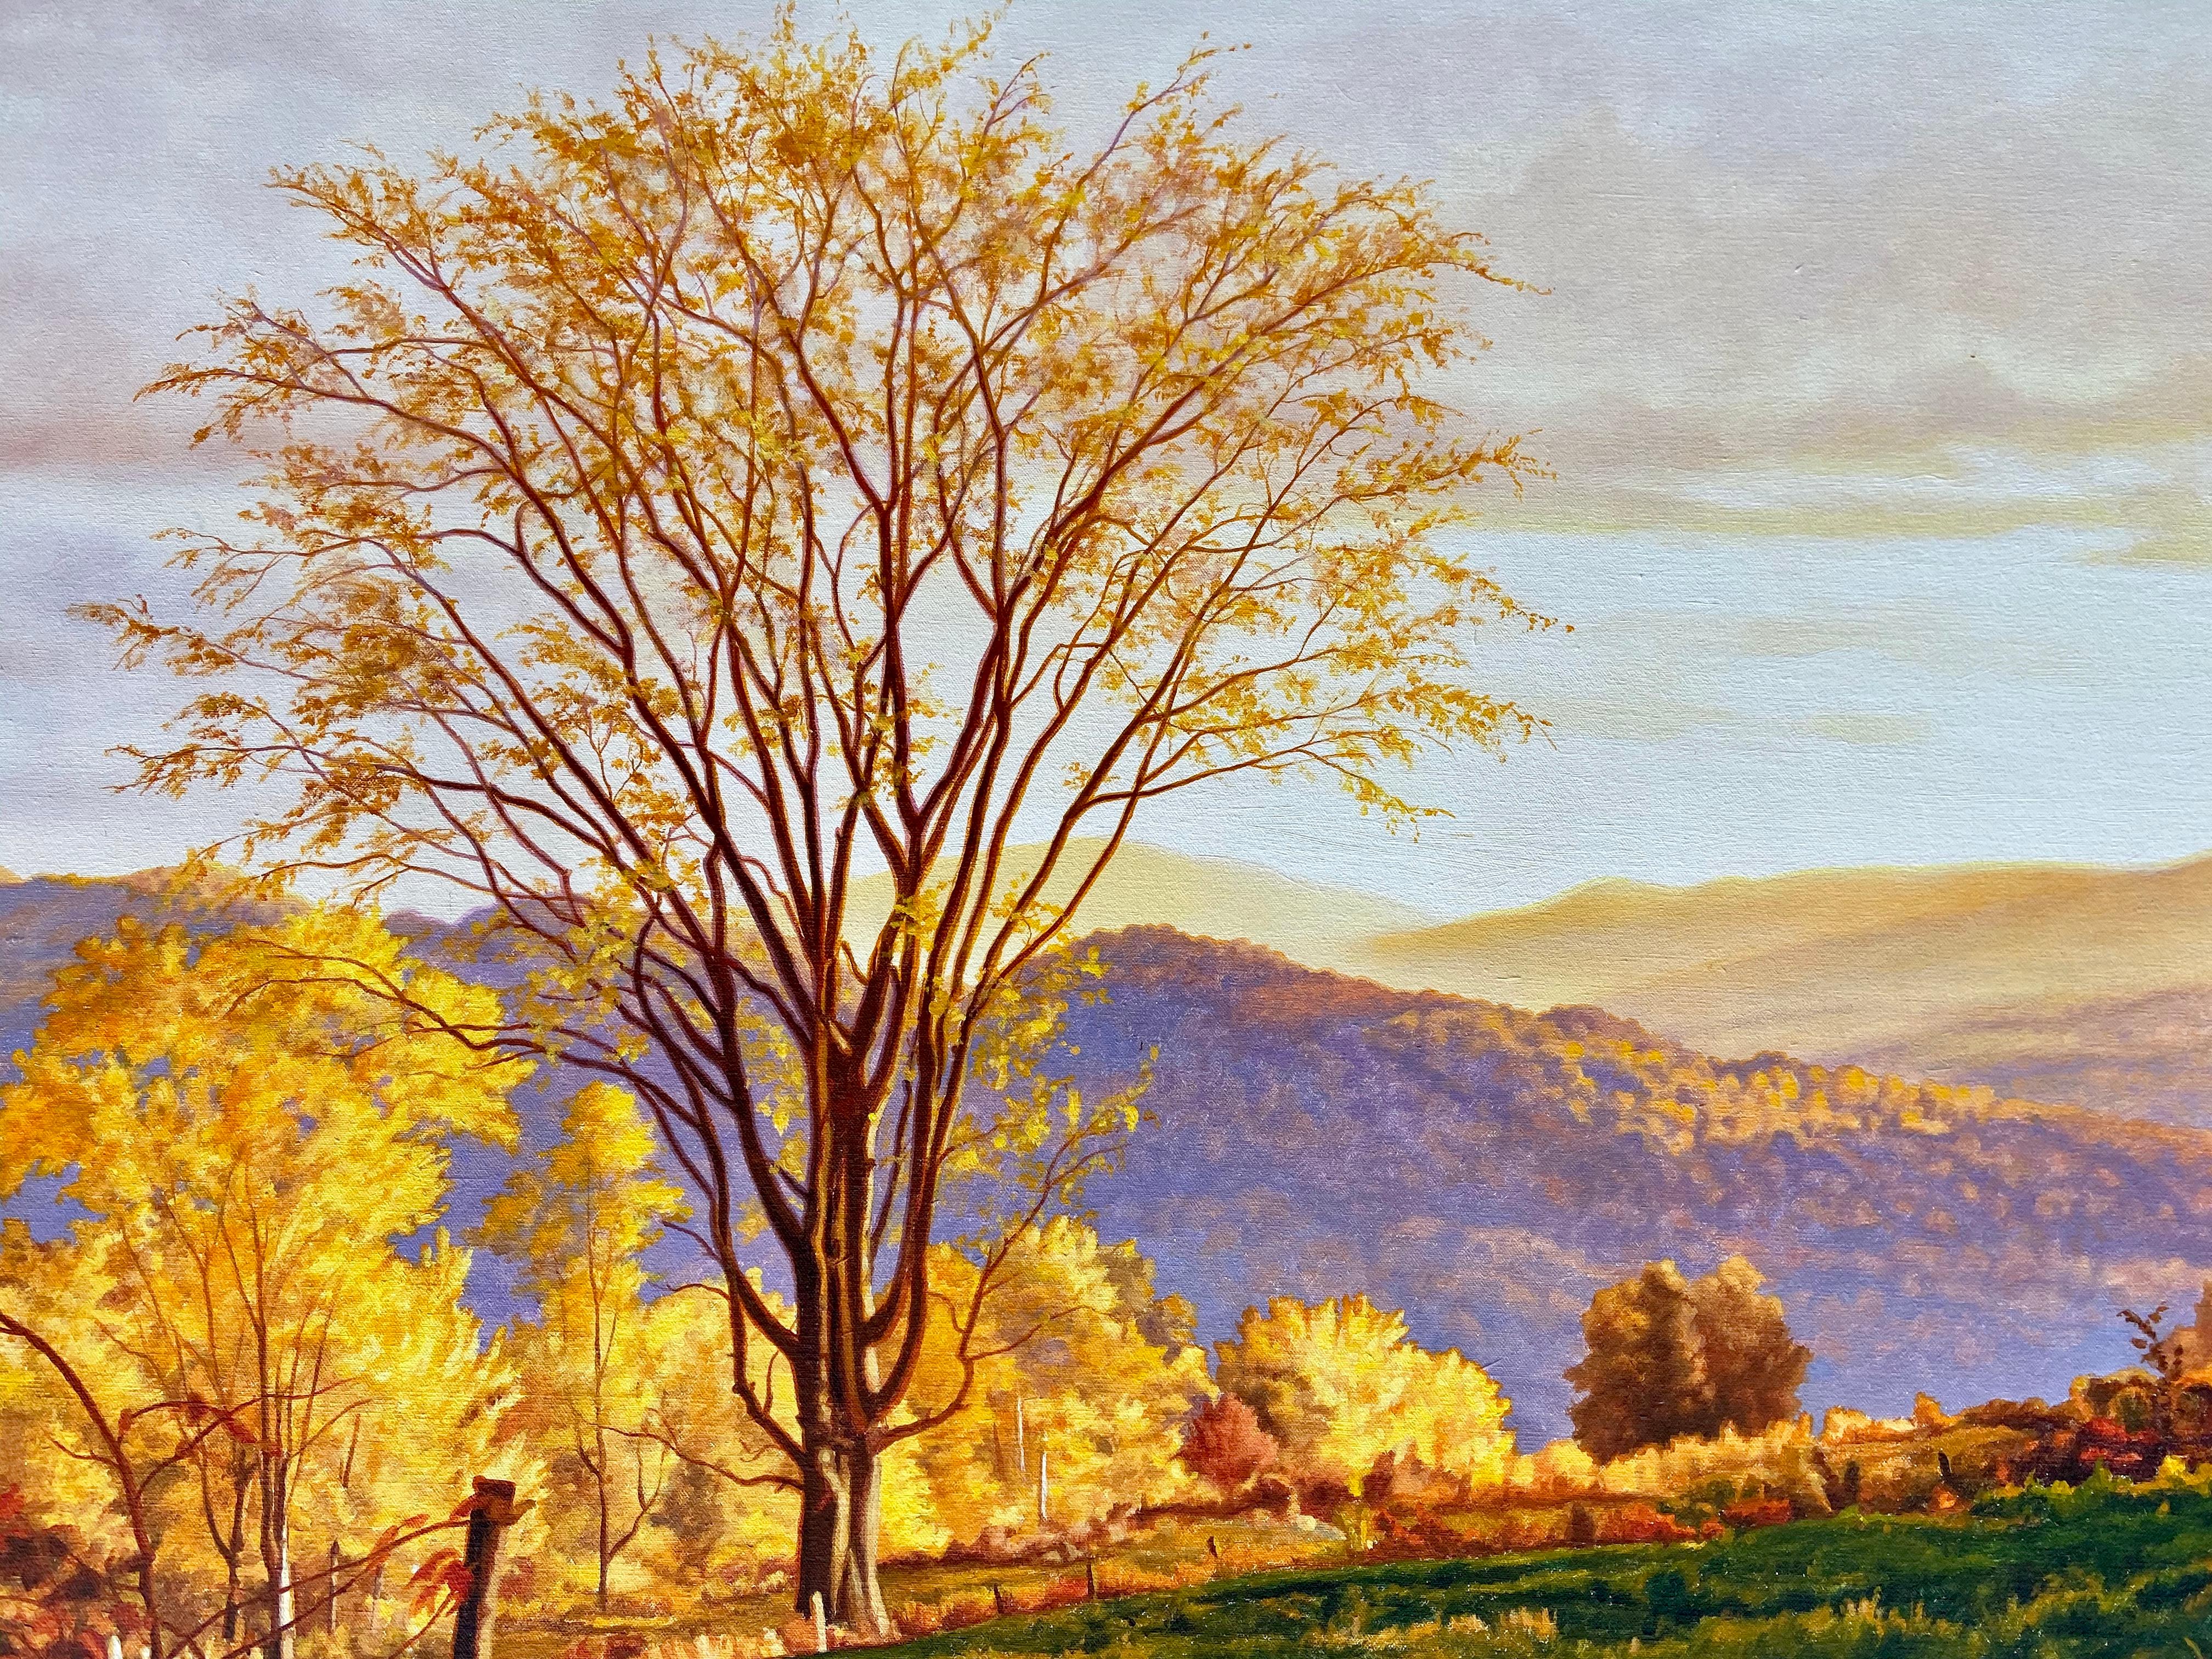 Marcia’s Meadow (Vermont) - Painting by Ian Hornak